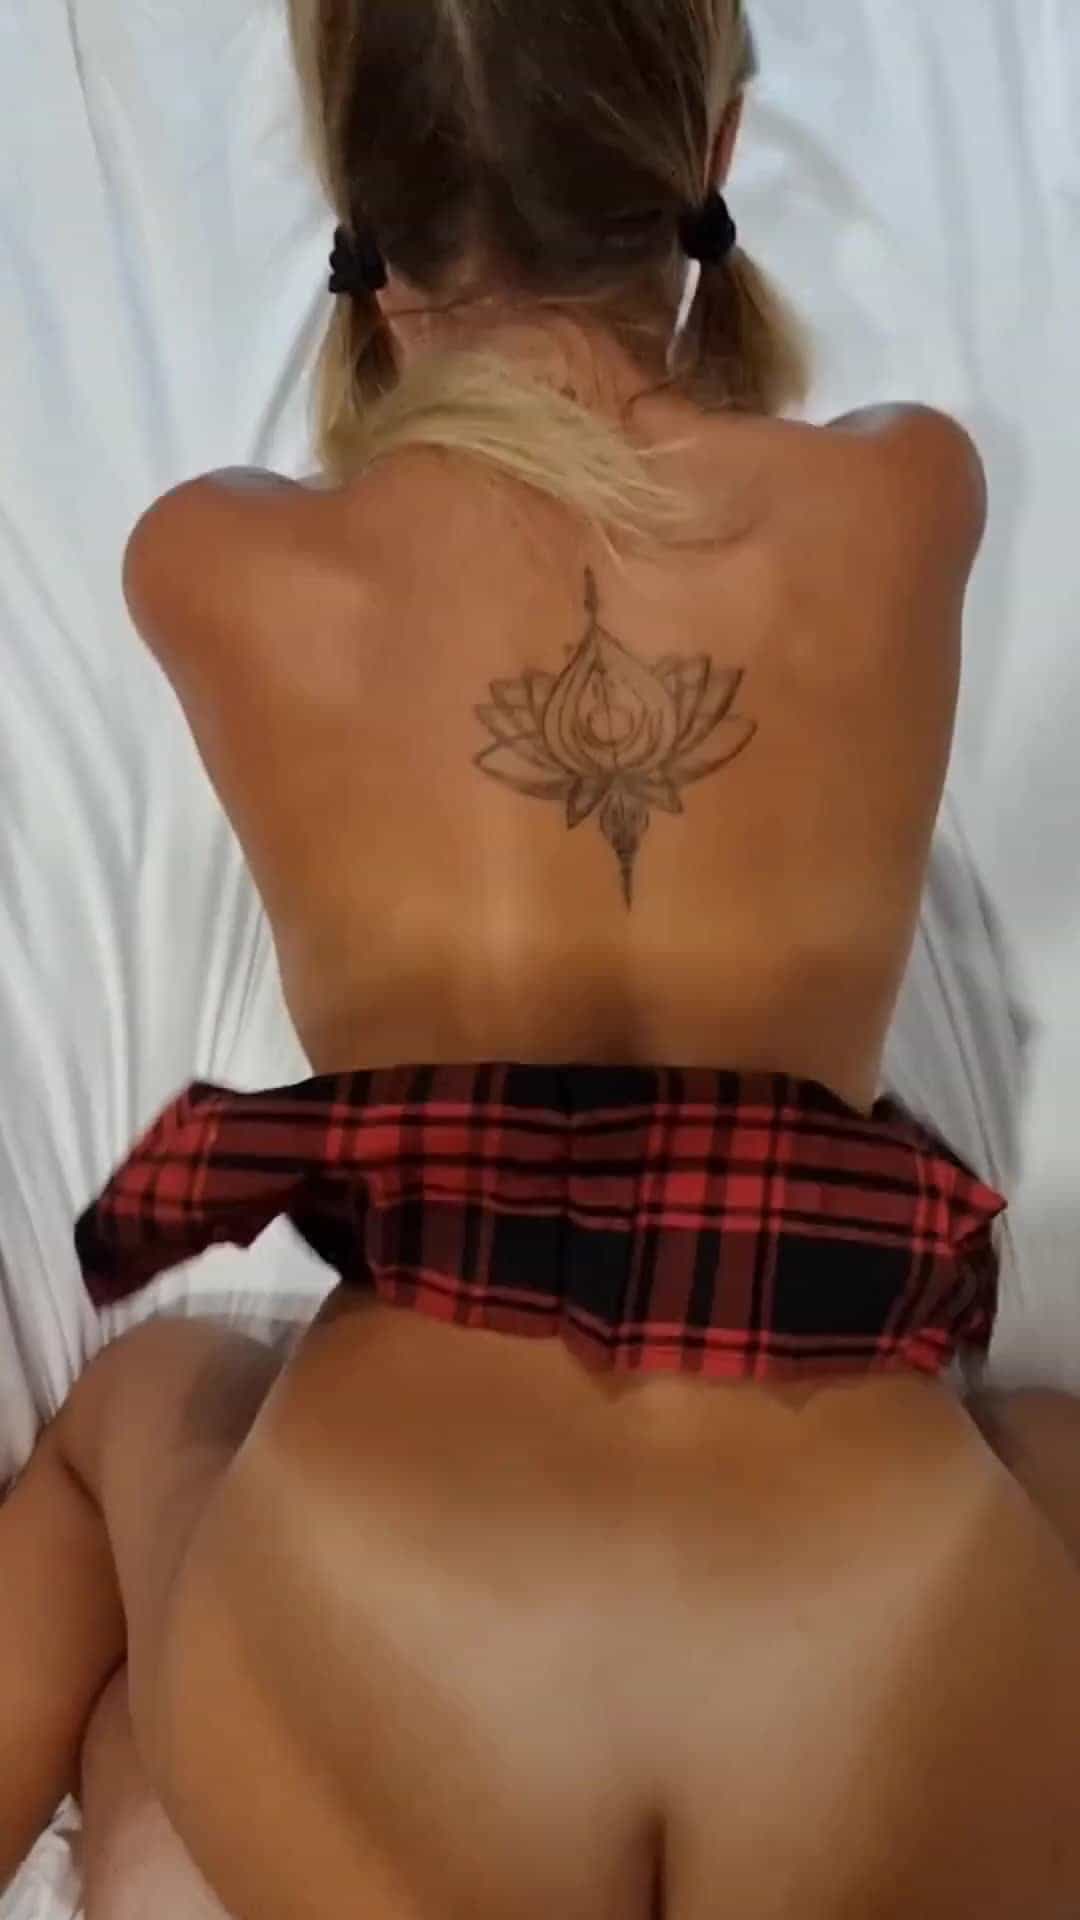 wonder if youd find my tanlines hot if you were fucking me doggy?